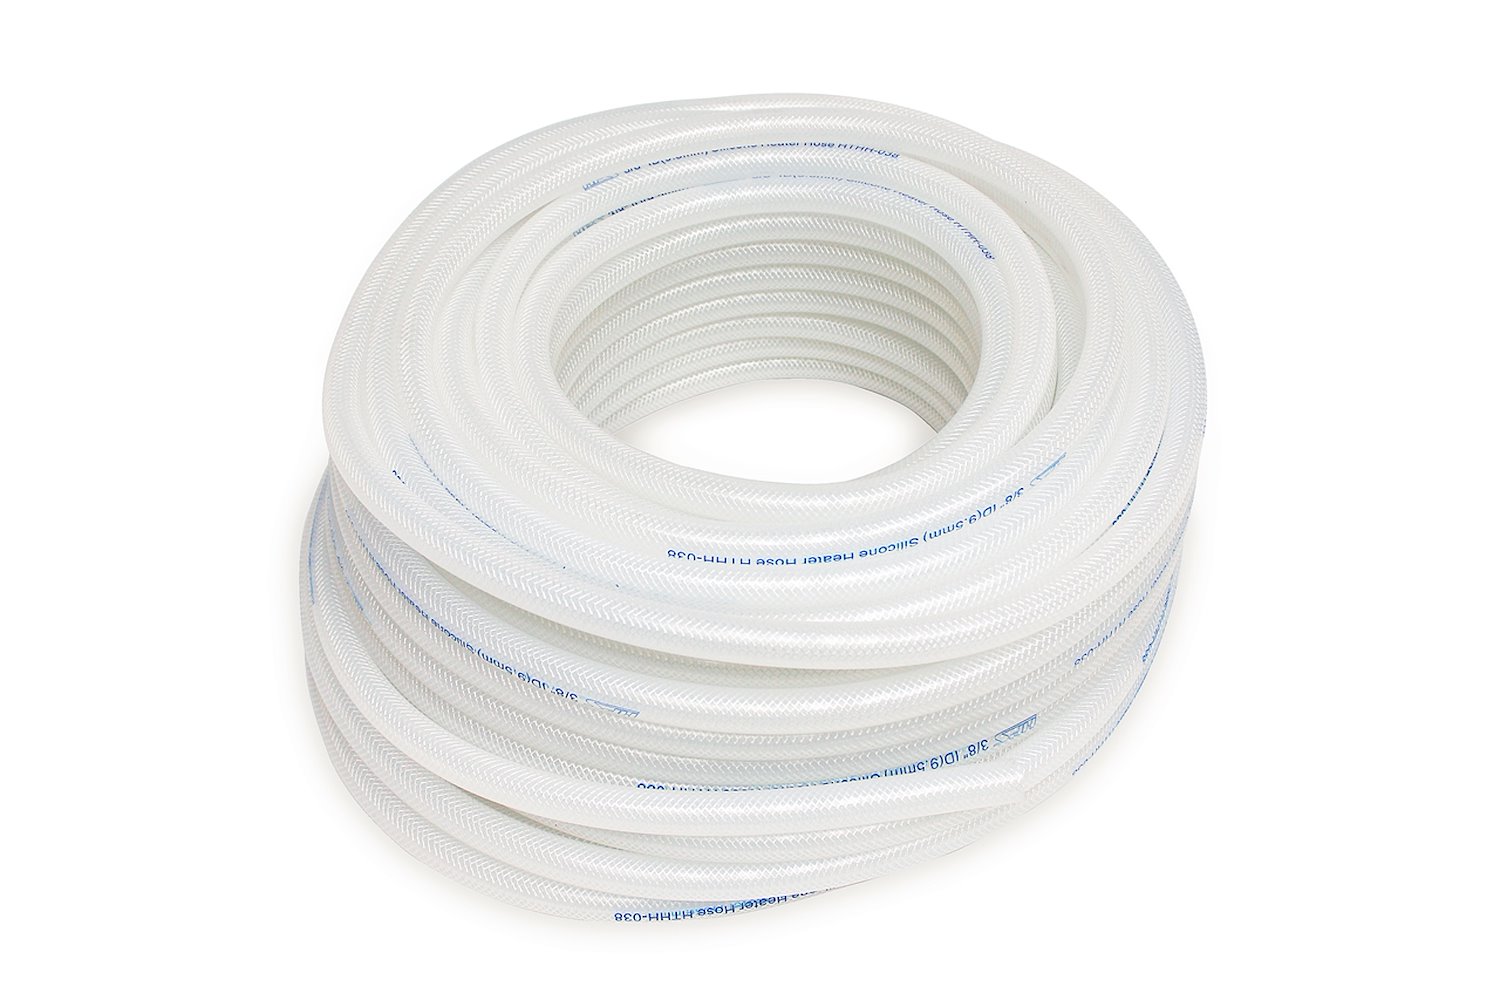 HTHH-016-CLEARx100 Silicone Heater Hose Tubing, High-Temp Reinforced, 5/32 in. ID, 100 ft. Roll, Clear